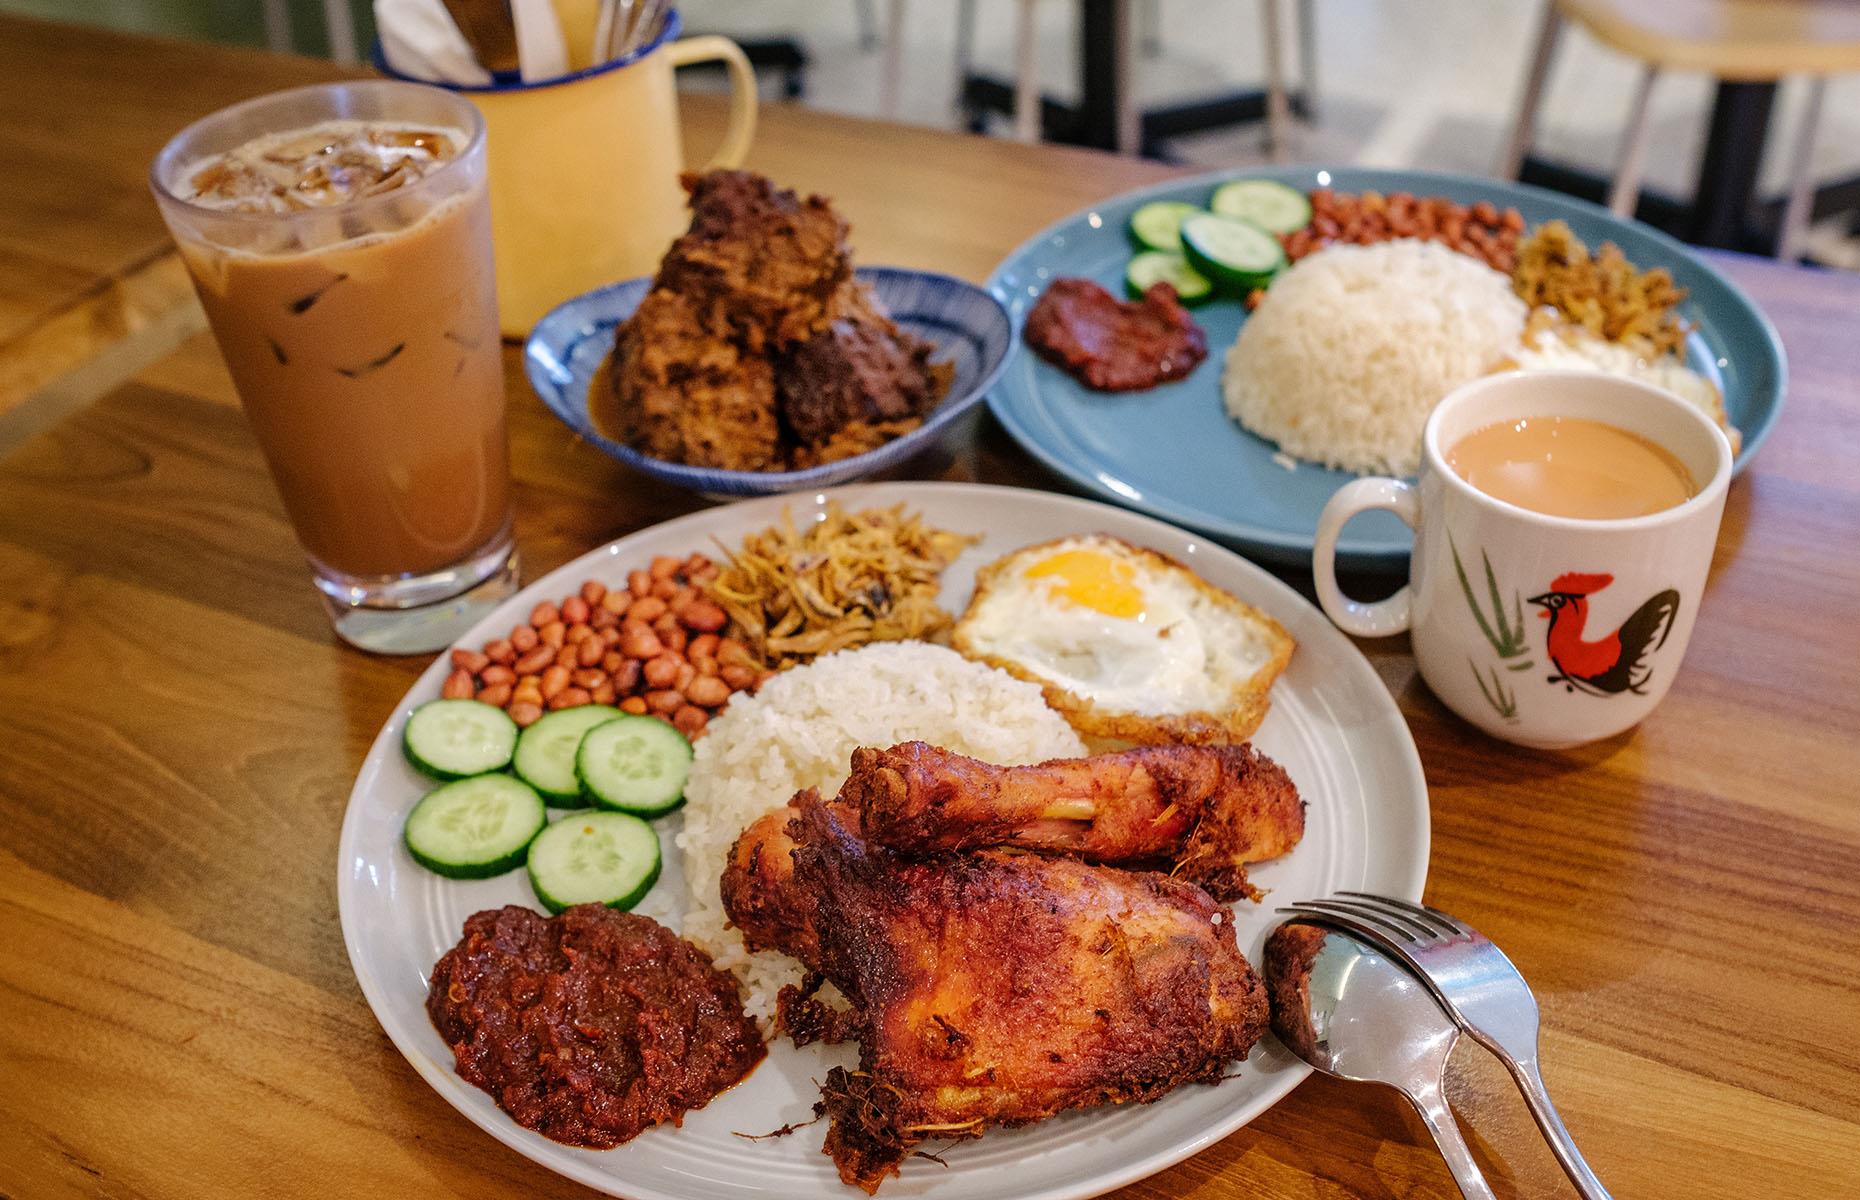 <p>If you fancy trying the nation’s favourite dish nasi lemak in smart surroundings, head to the Coconut Club on Beach Road. The fragrant rice cooked in coconut milk and pandan leaves, accompanied by side dishes such as roasted nuts, anchovies, fried egg, cucumber and a spoonful of sambal (chilli paste), is superb. Order the Ayam Goreng Berempah (fried chicken in a specialty hot sauce) too. Save room for ice cream at Birds of Paradise Gelato Boutique a few doors down, where the unique botanical flavours are irresistible.</p>